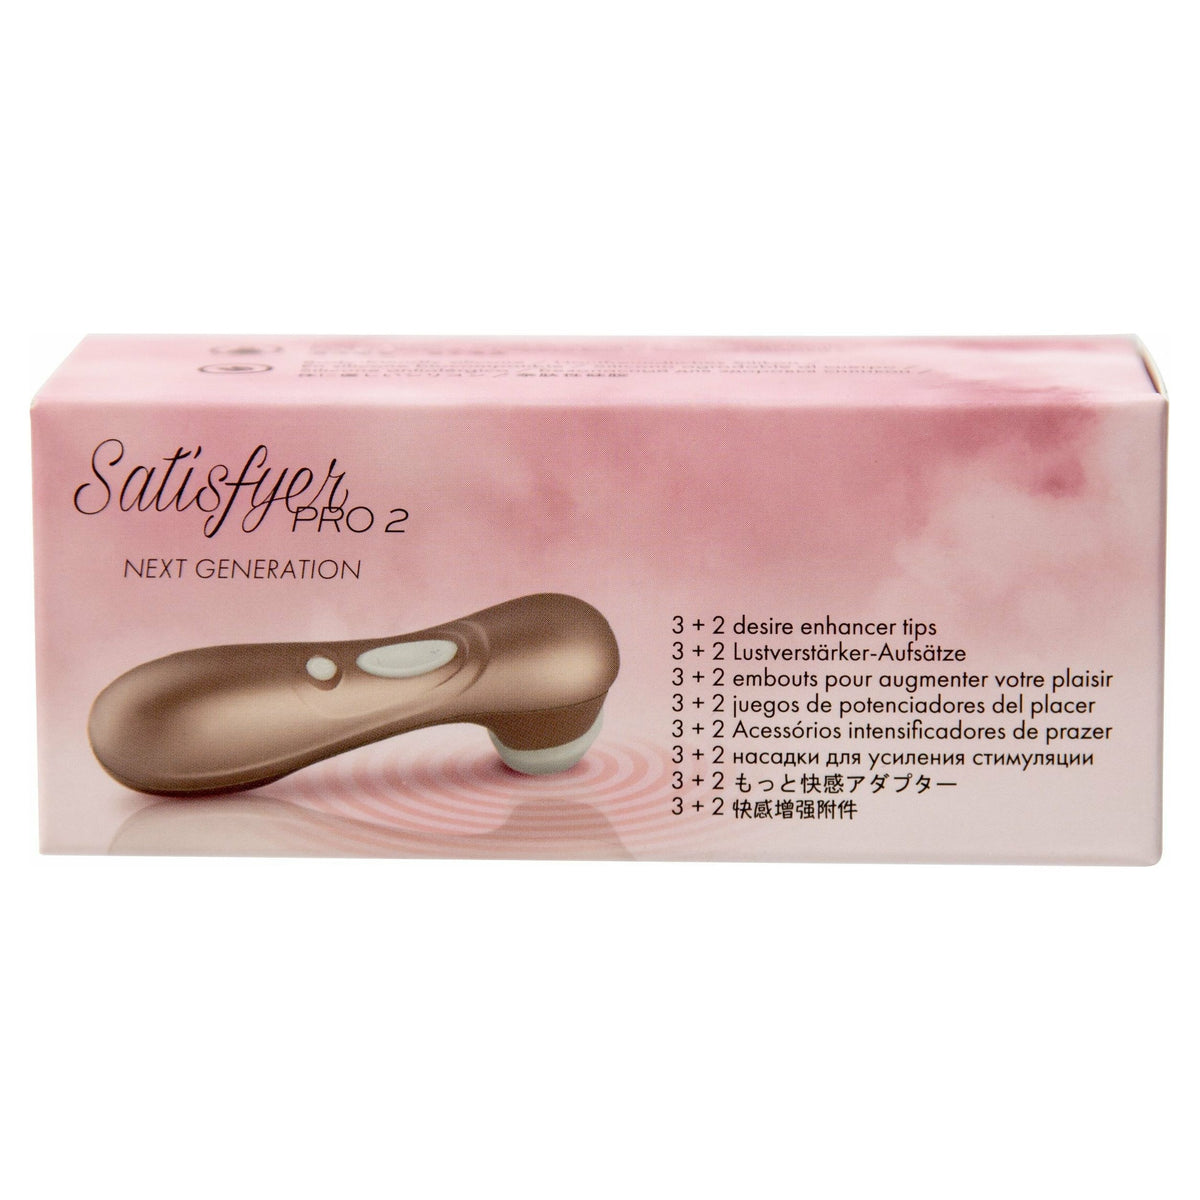 Satisfyer Pro 2 Tips - 3 Climax Tips and 2 Desire Enhancer Tips